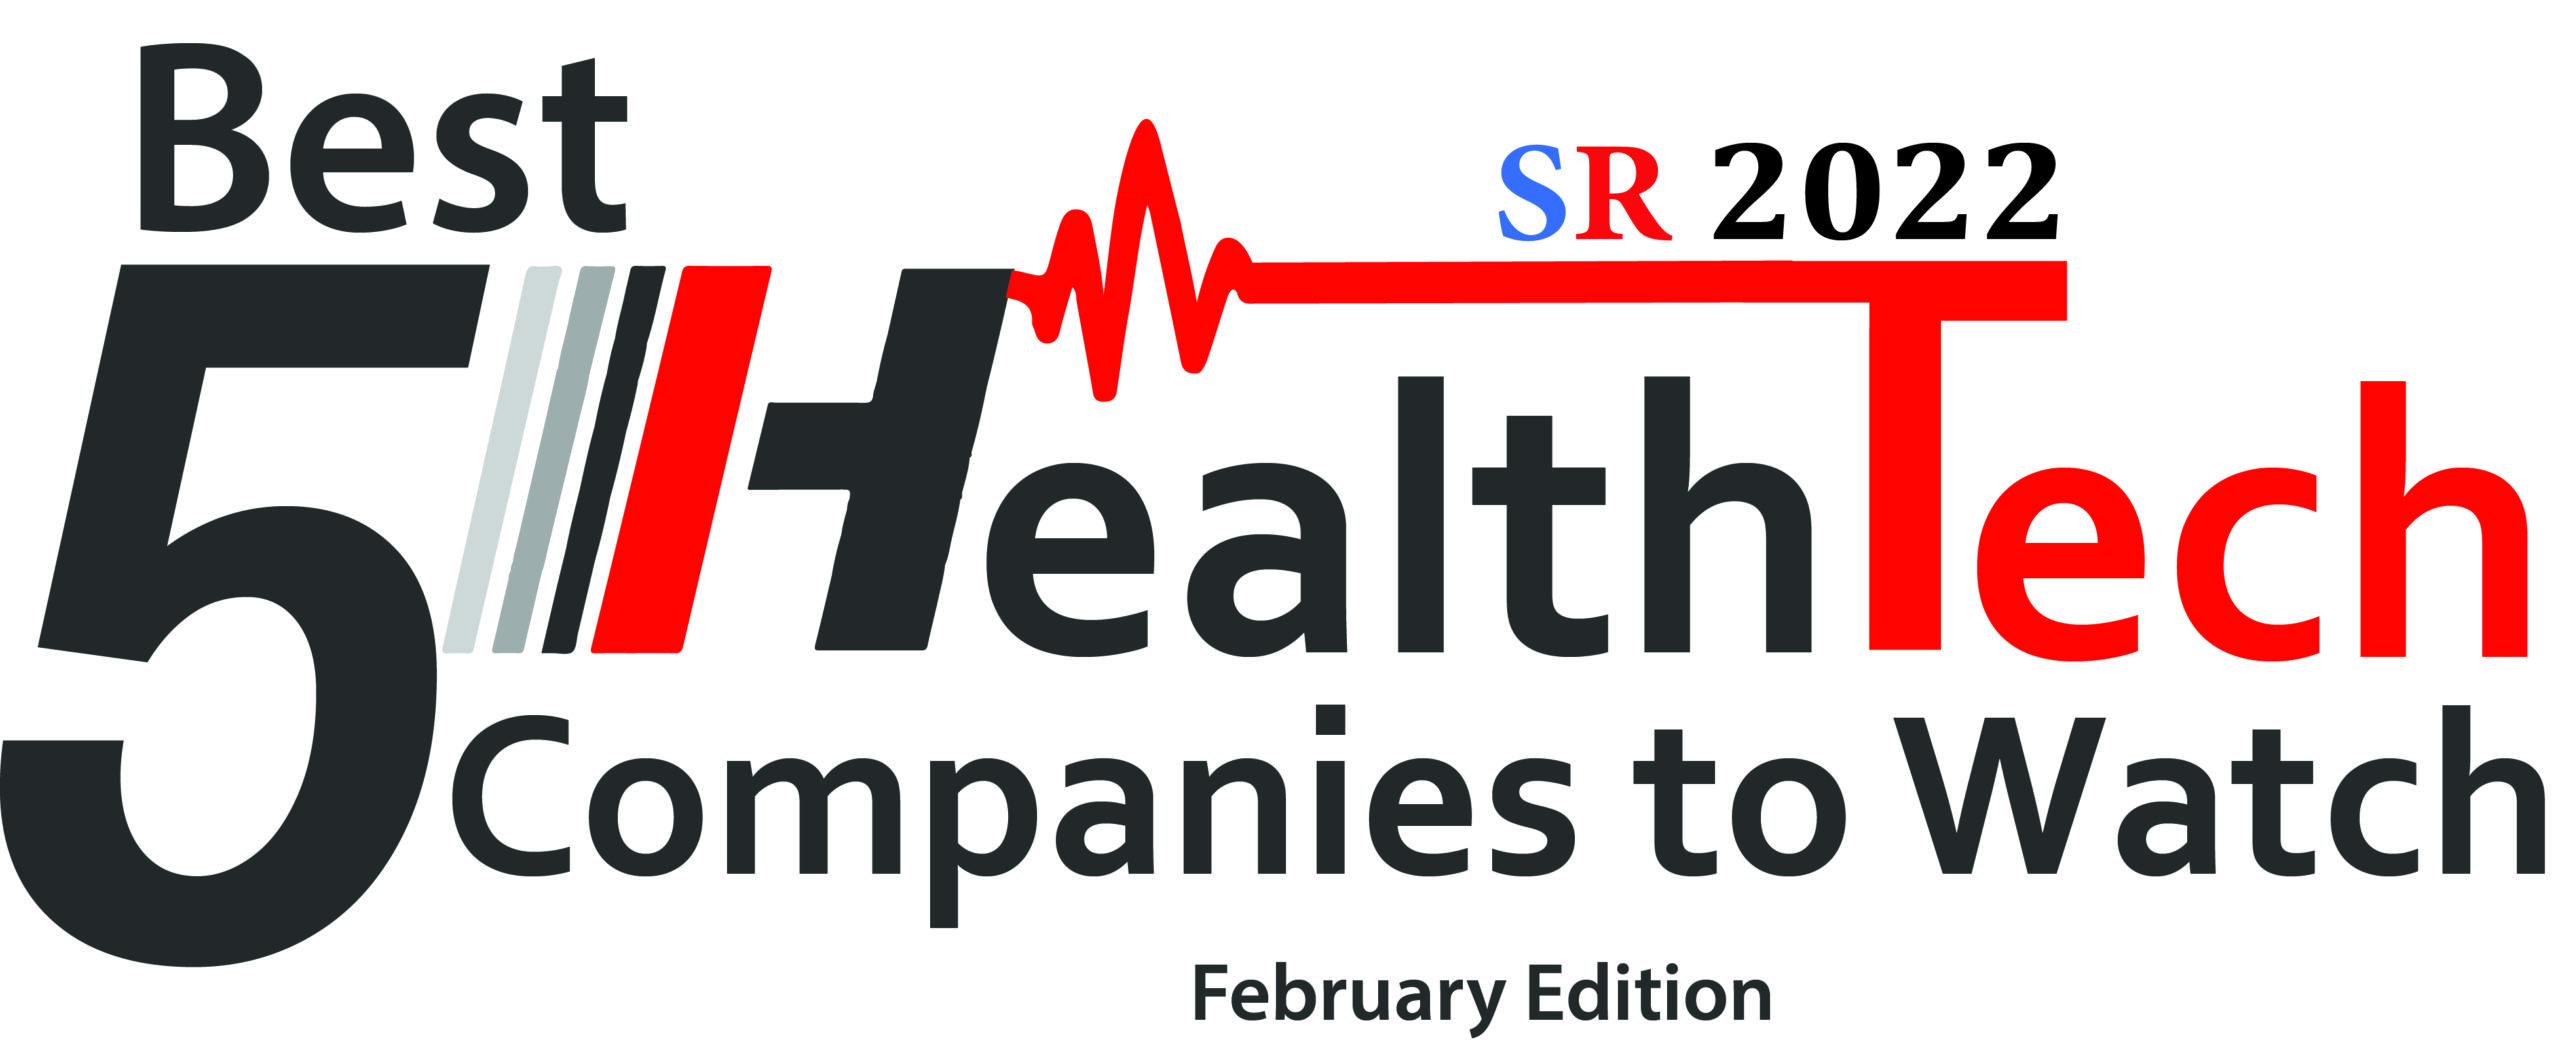 Trisotech Heads Top 5 Best Health Tech Companies to Watch in 2022